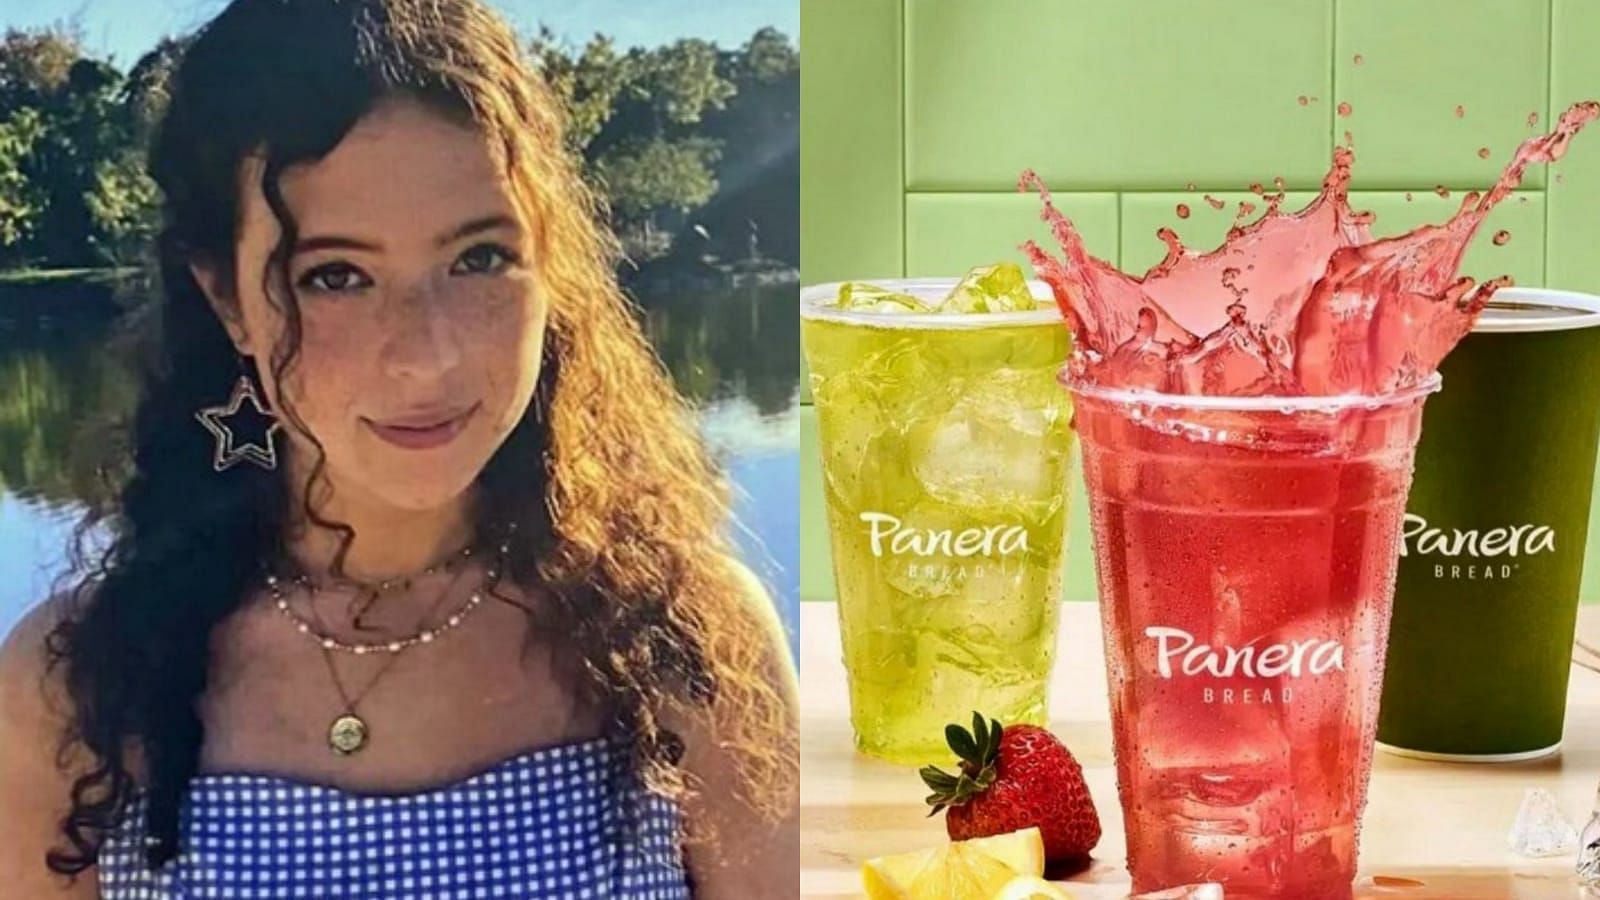 Panera Bread is being sued over the death of an Ivy league student. (Images via Twitter/@cleaner_ed and Panera Bread)